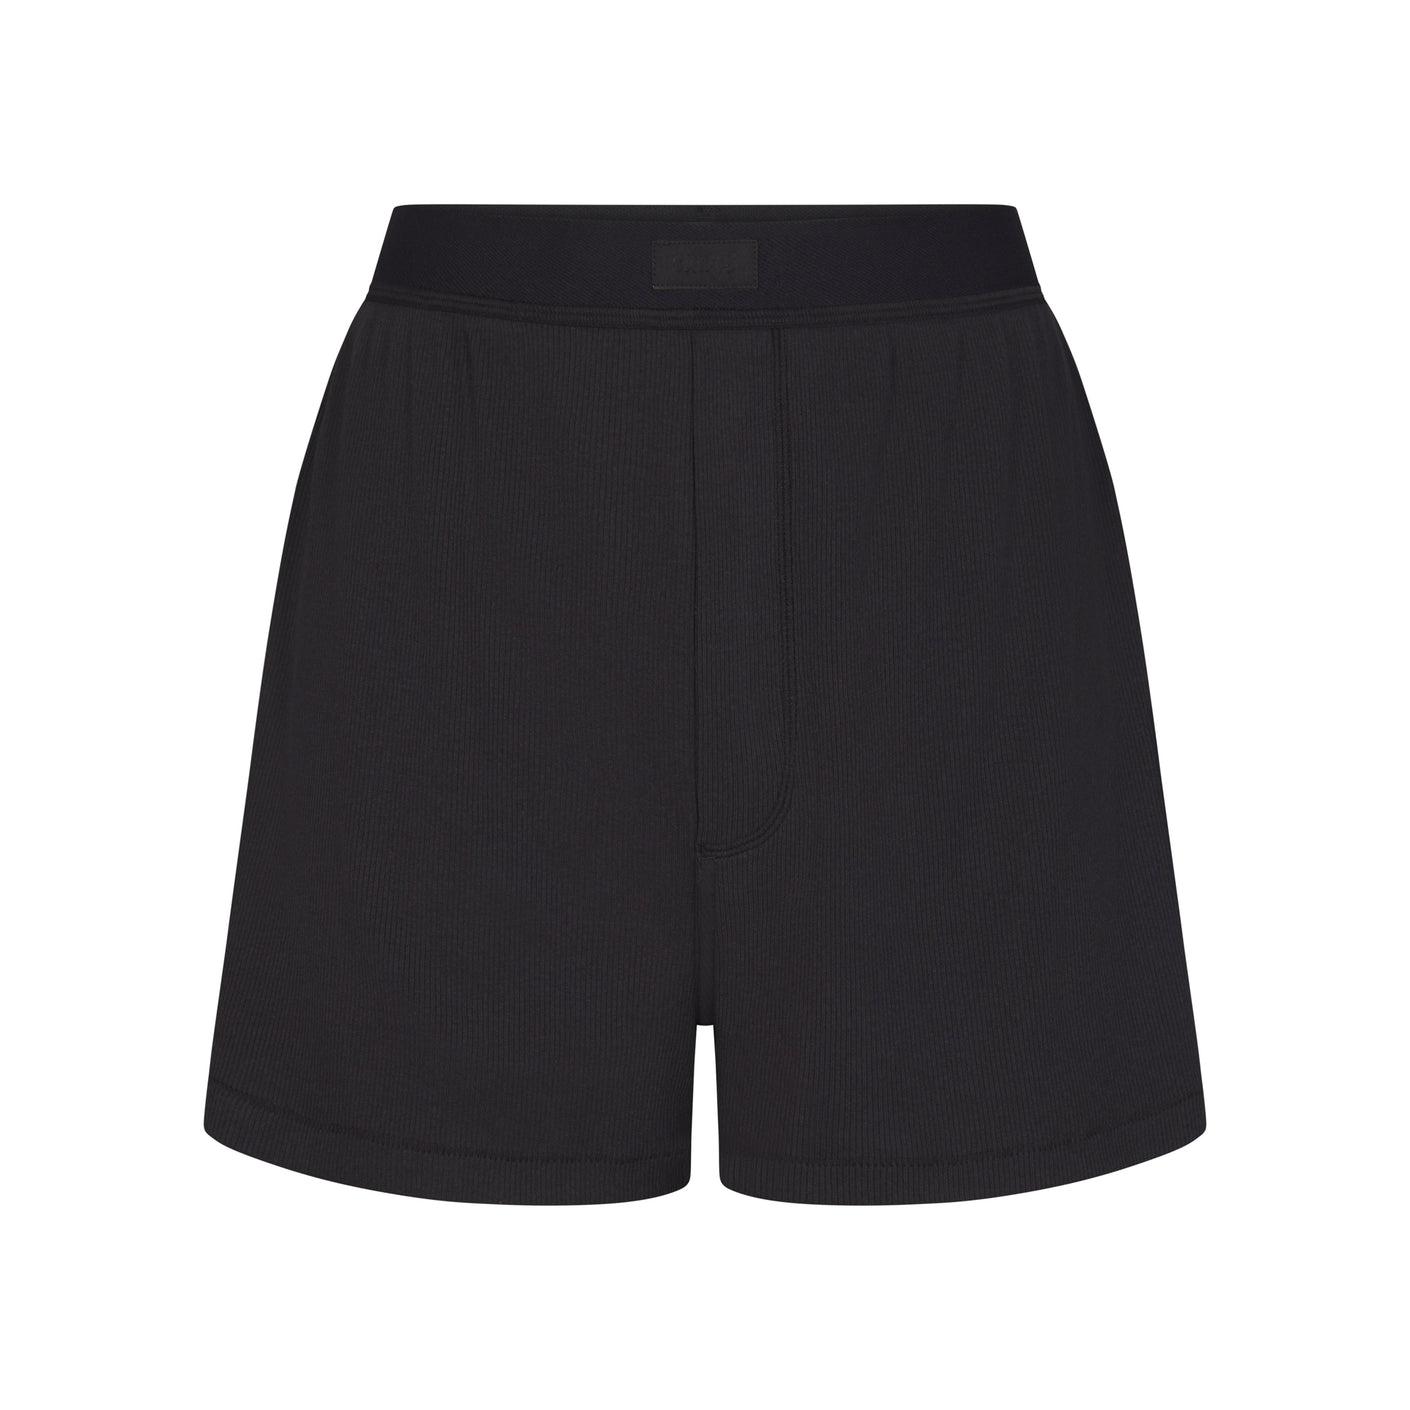 SKIMS Cotton rib boxers Black Size XS - $38 New With Tags - From Rachel